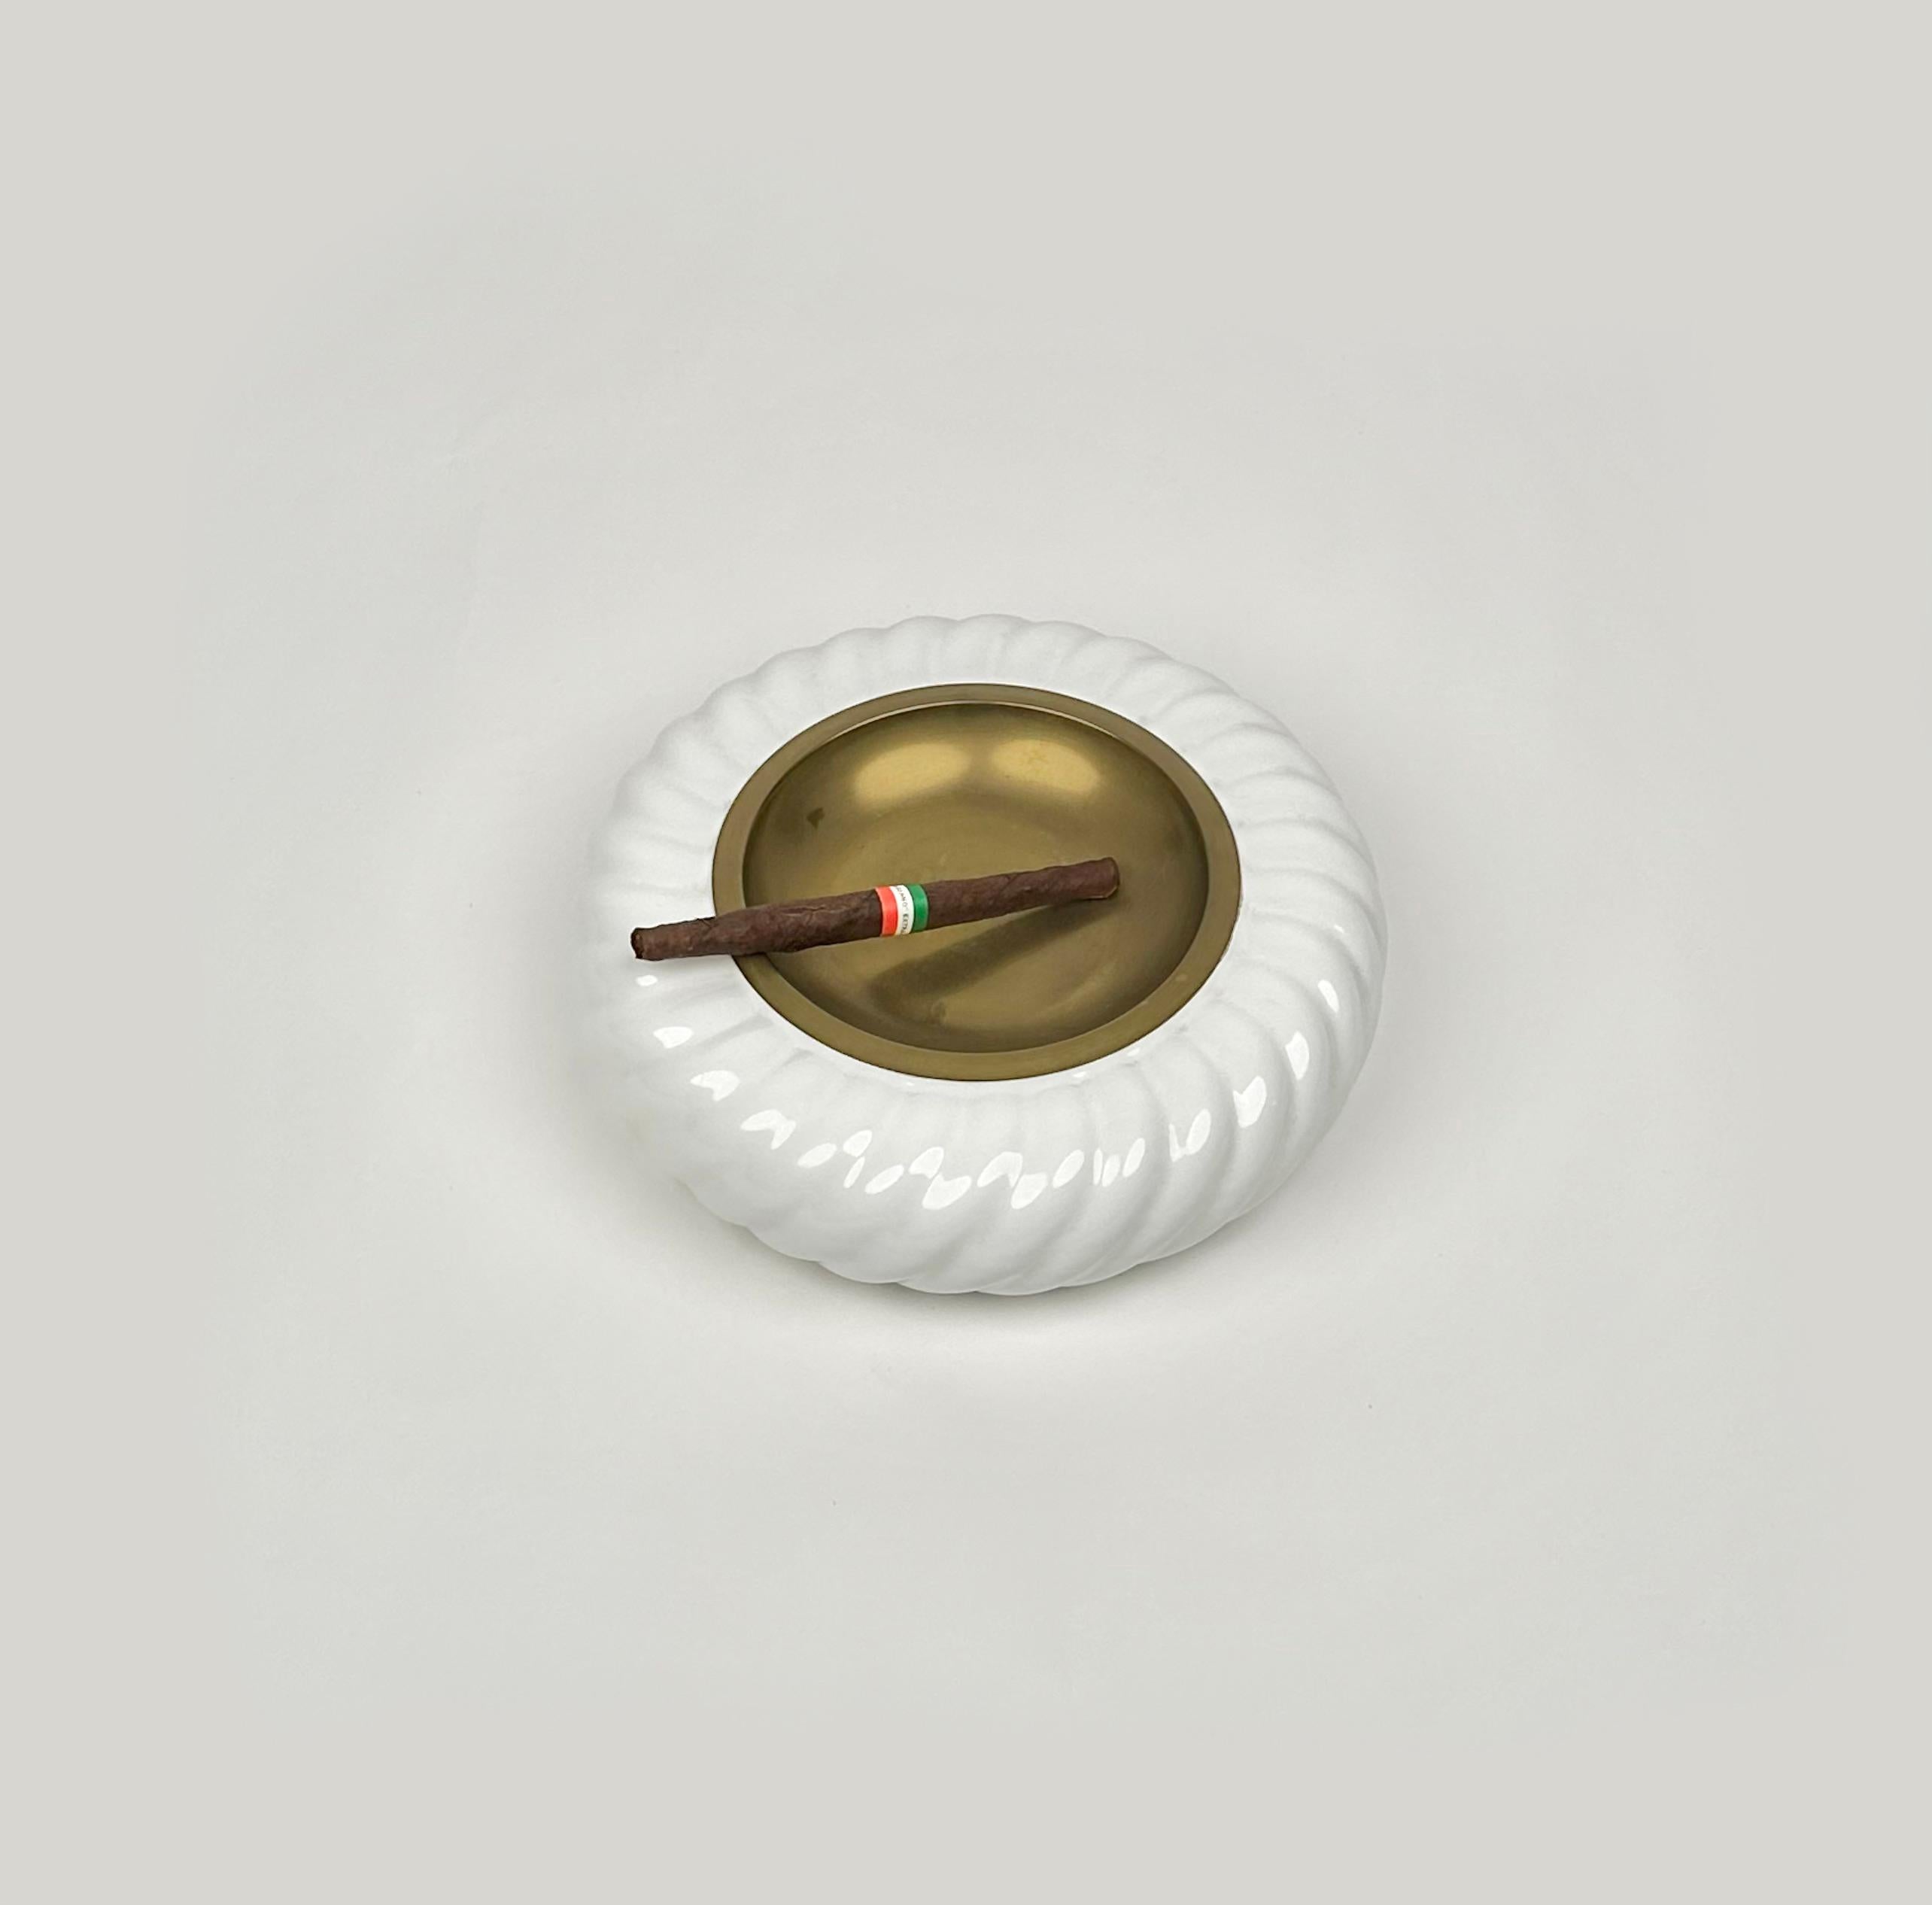 Vide-Poche or Ashtray White Ceramic and Brass by Tommaso Barbi, Italy 1970s For Sale 1